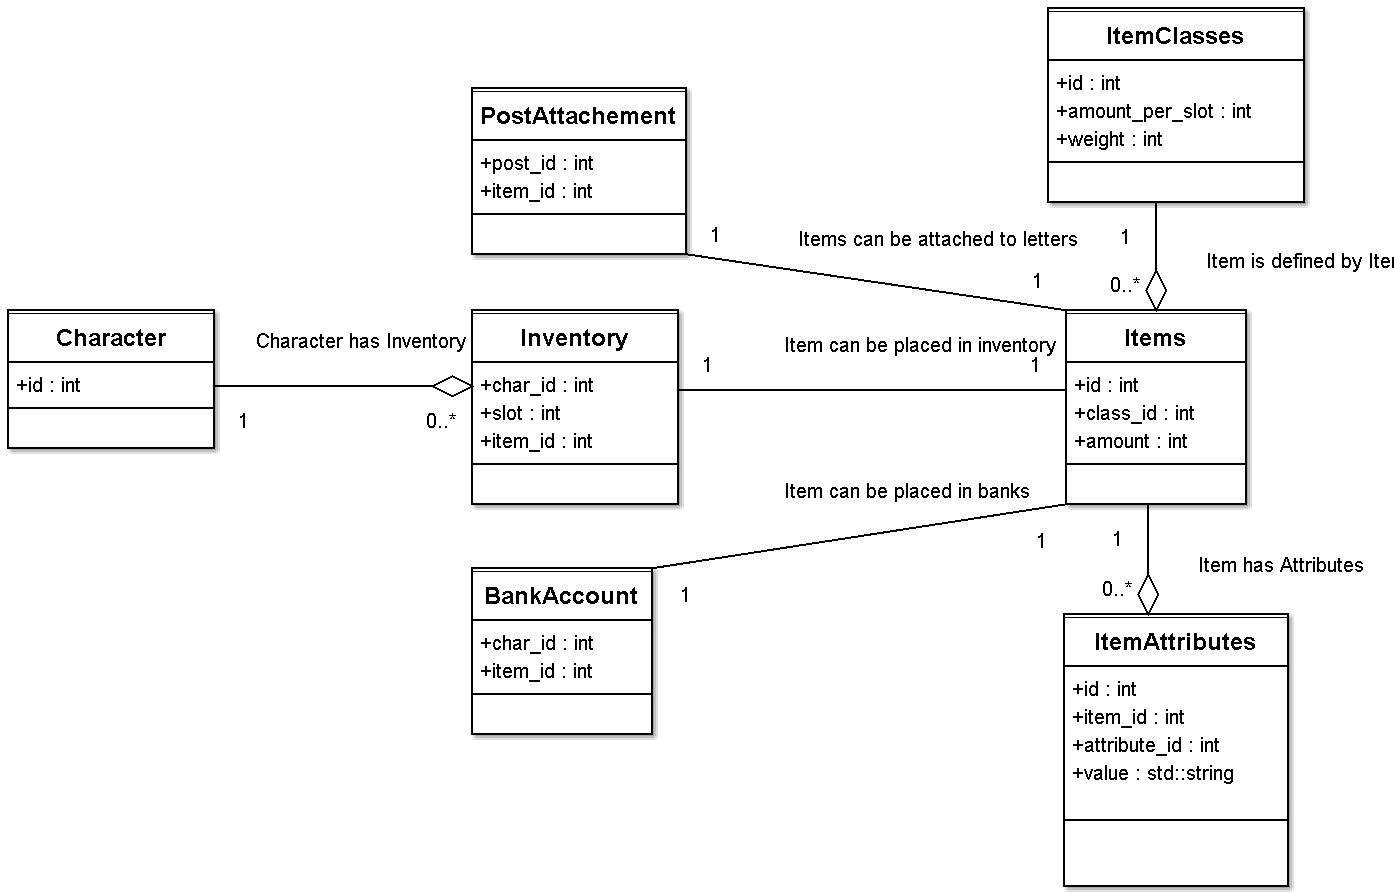 Added proptotype UML model describing the database structure i talked about ;-)